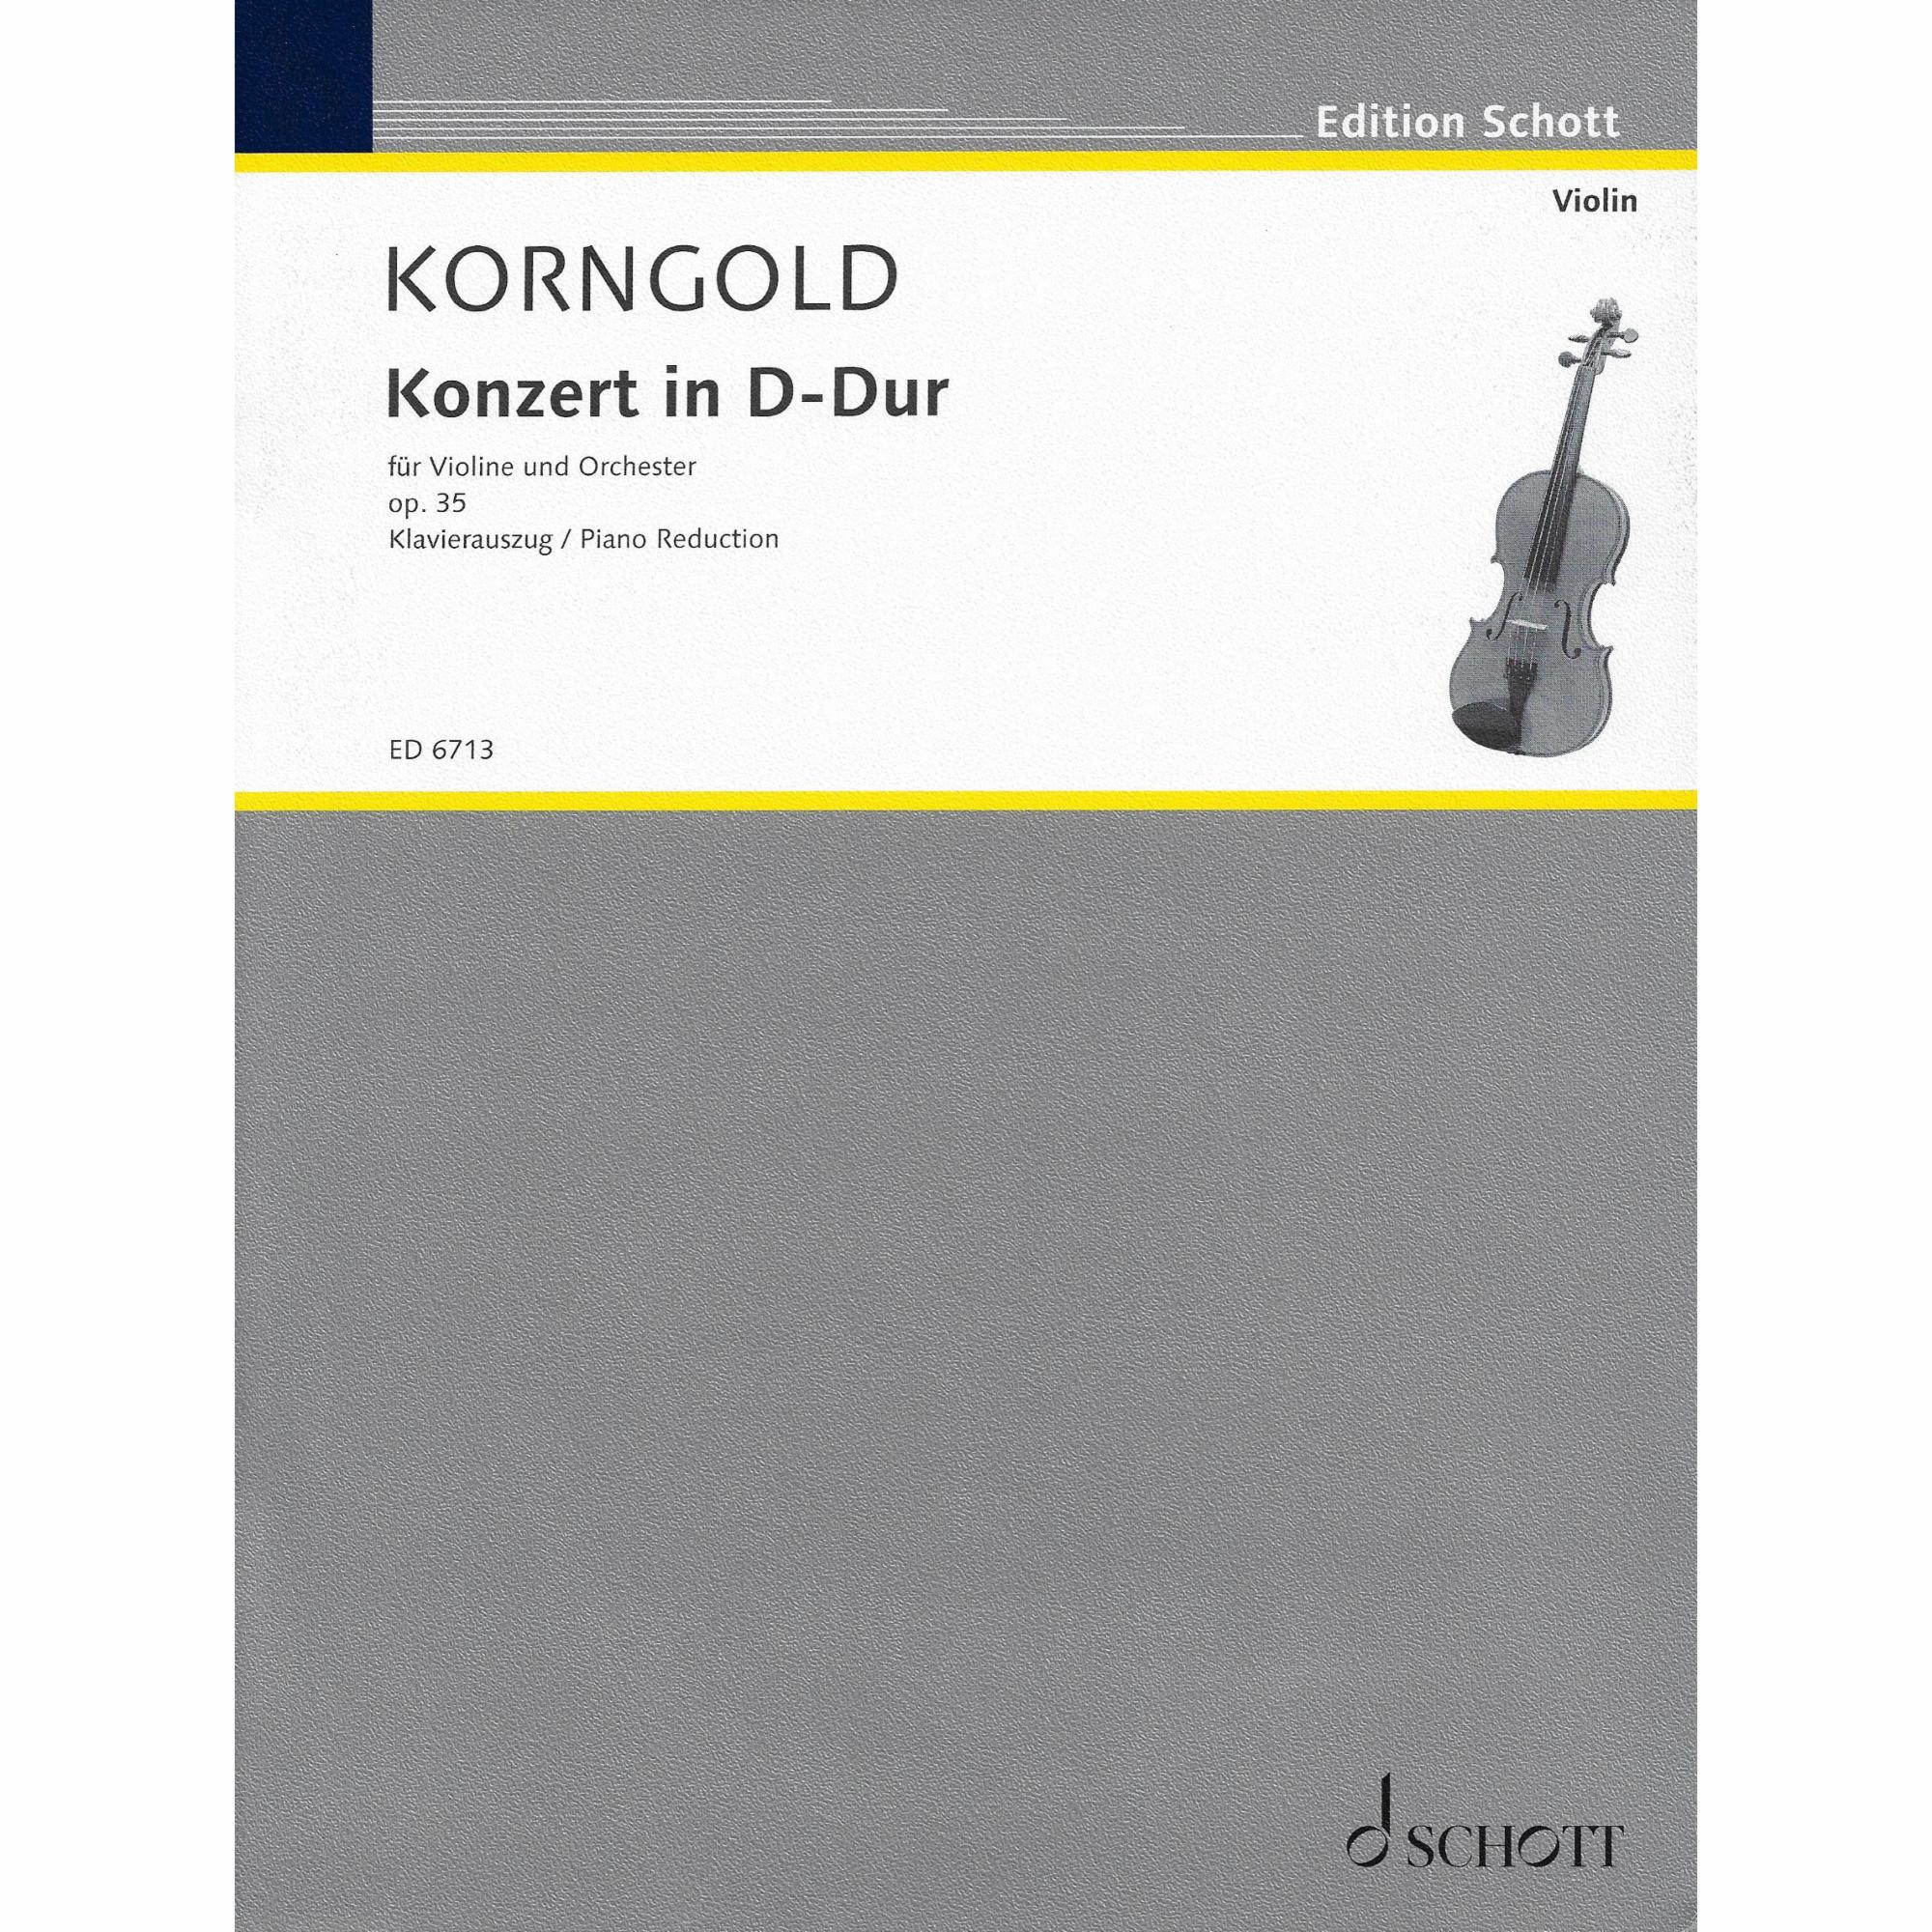 Korngold -- Concerto in D Major, Op. 35 for Violin and Piano